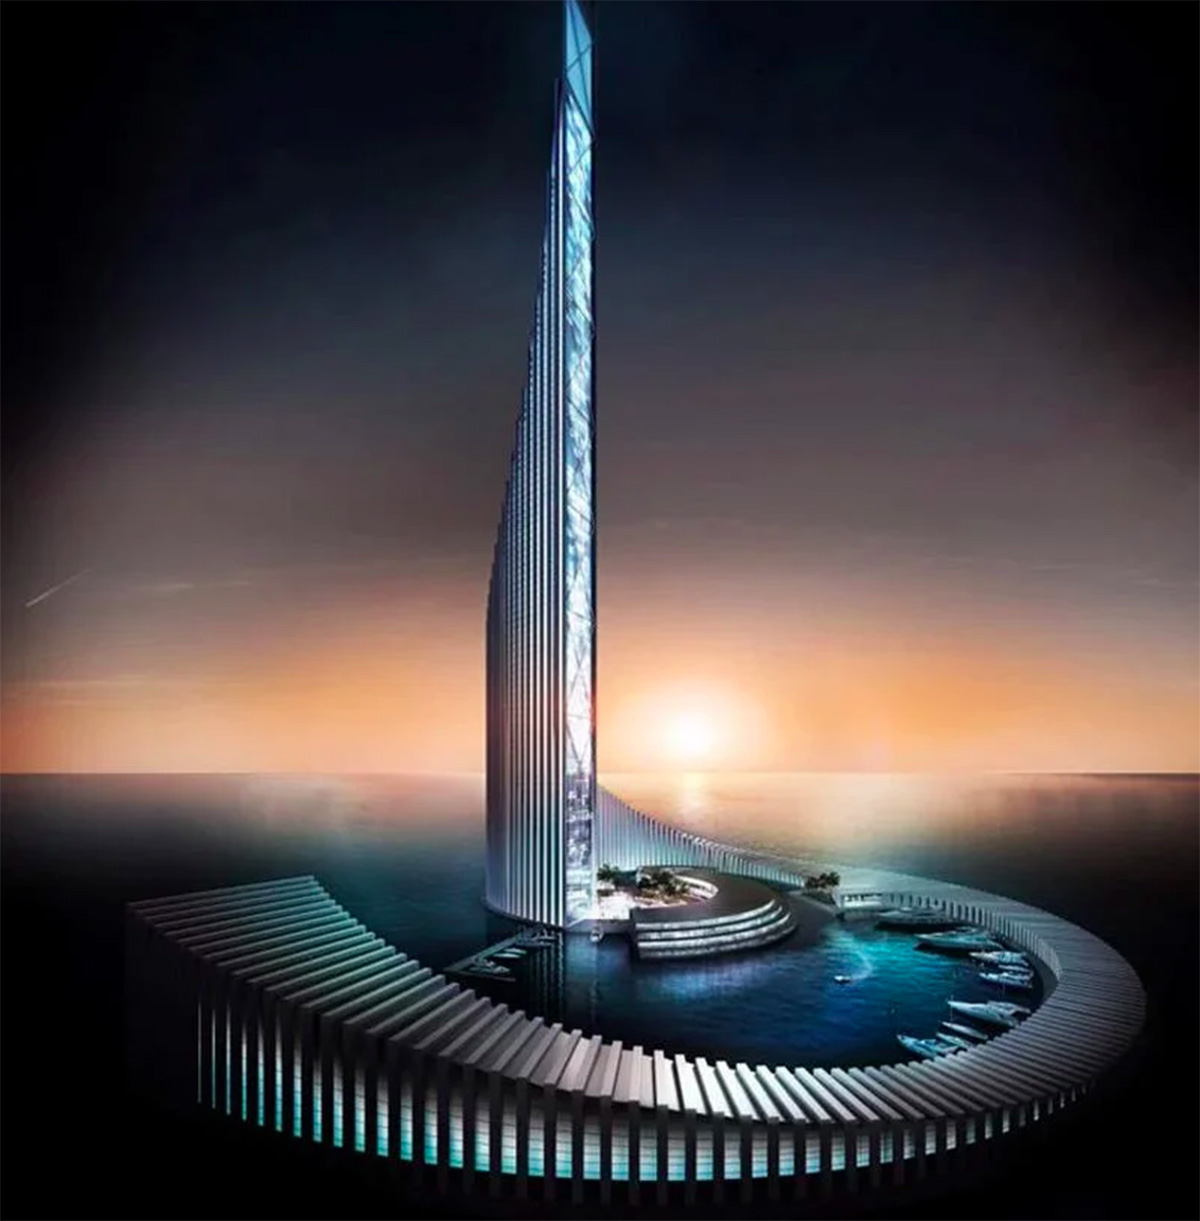 Images revealed for Zanzibar Domino Commercial Tower that will become Africa's second tallest tower